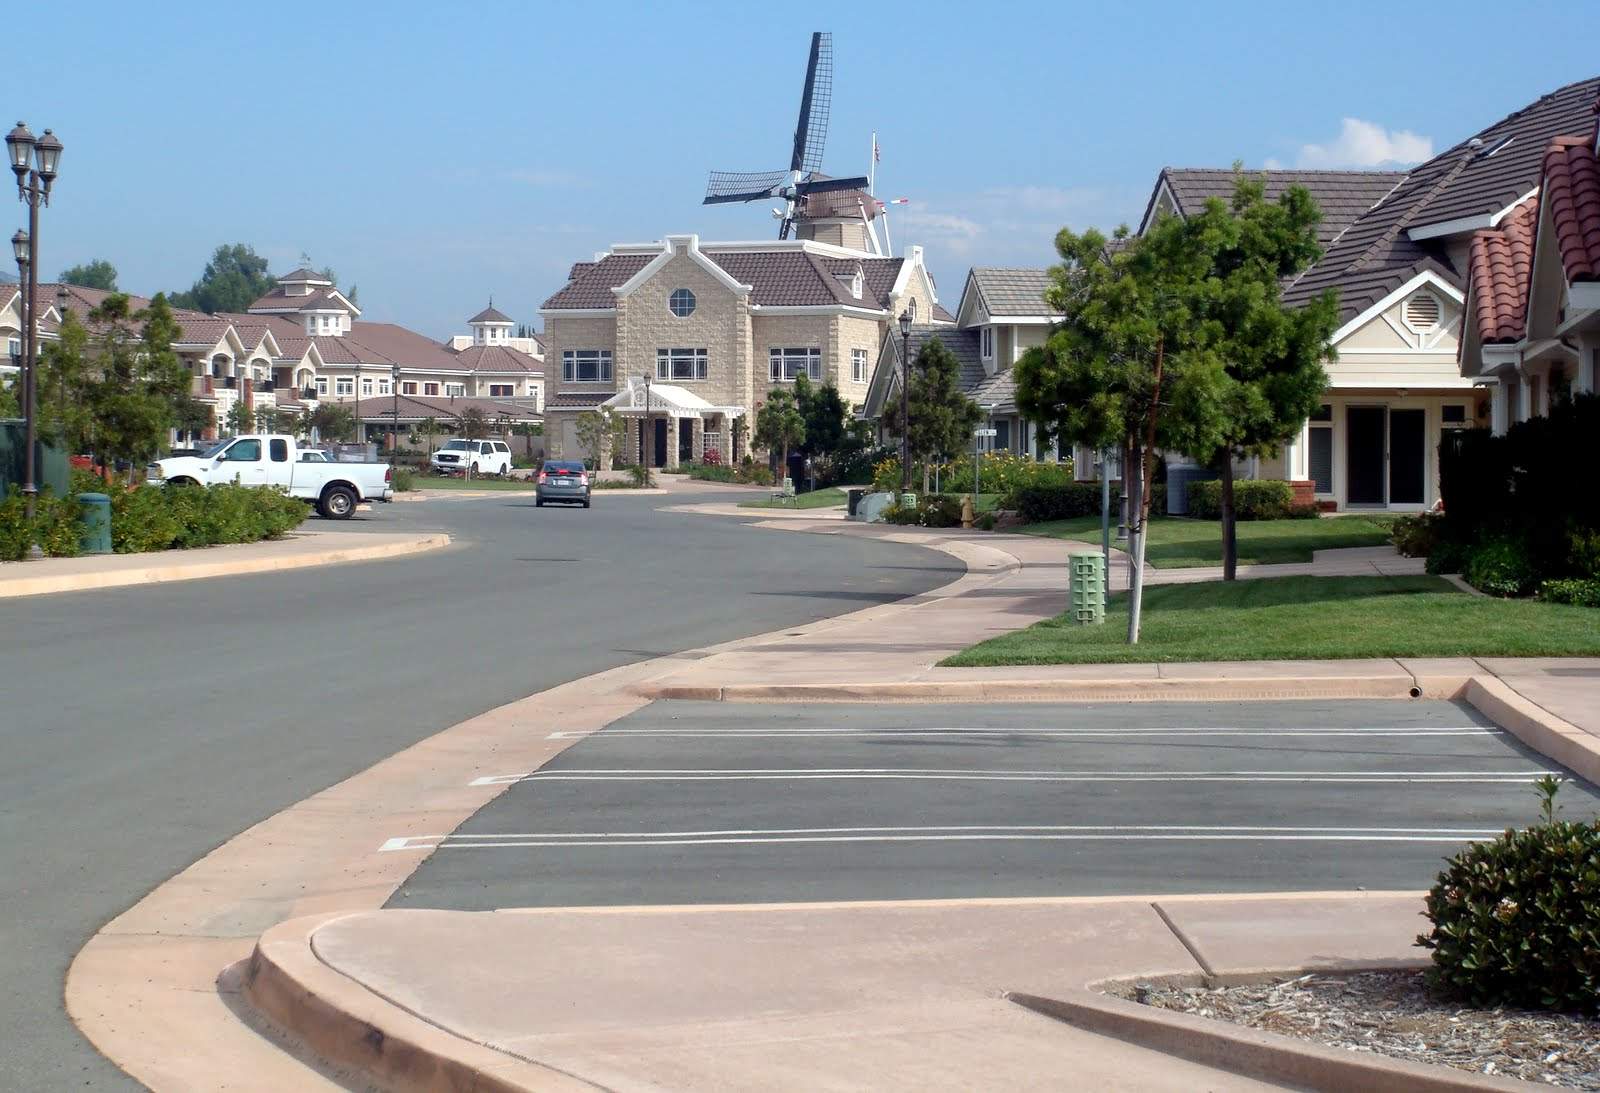 Meadowbrook Village Christian Retirement Community - The color of the curbs and gutters is Davis Colors' Harvest Gold. The color of the sidewalks is Davis Colors' Meadowbrook Brown (custom color).